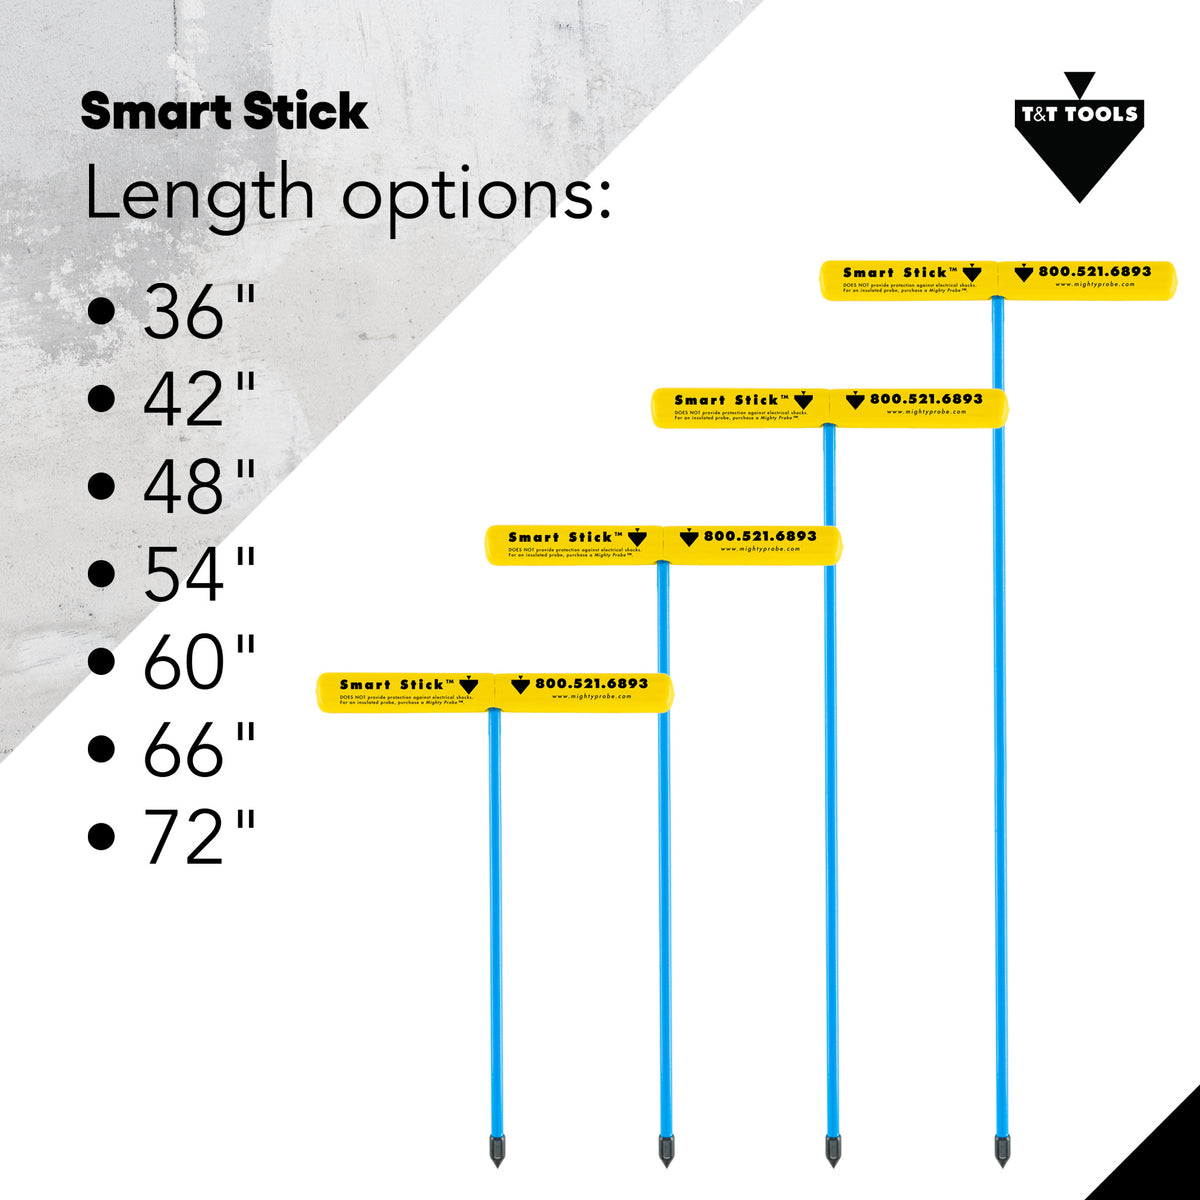 Smart Stick - from $67 - T&T Tools